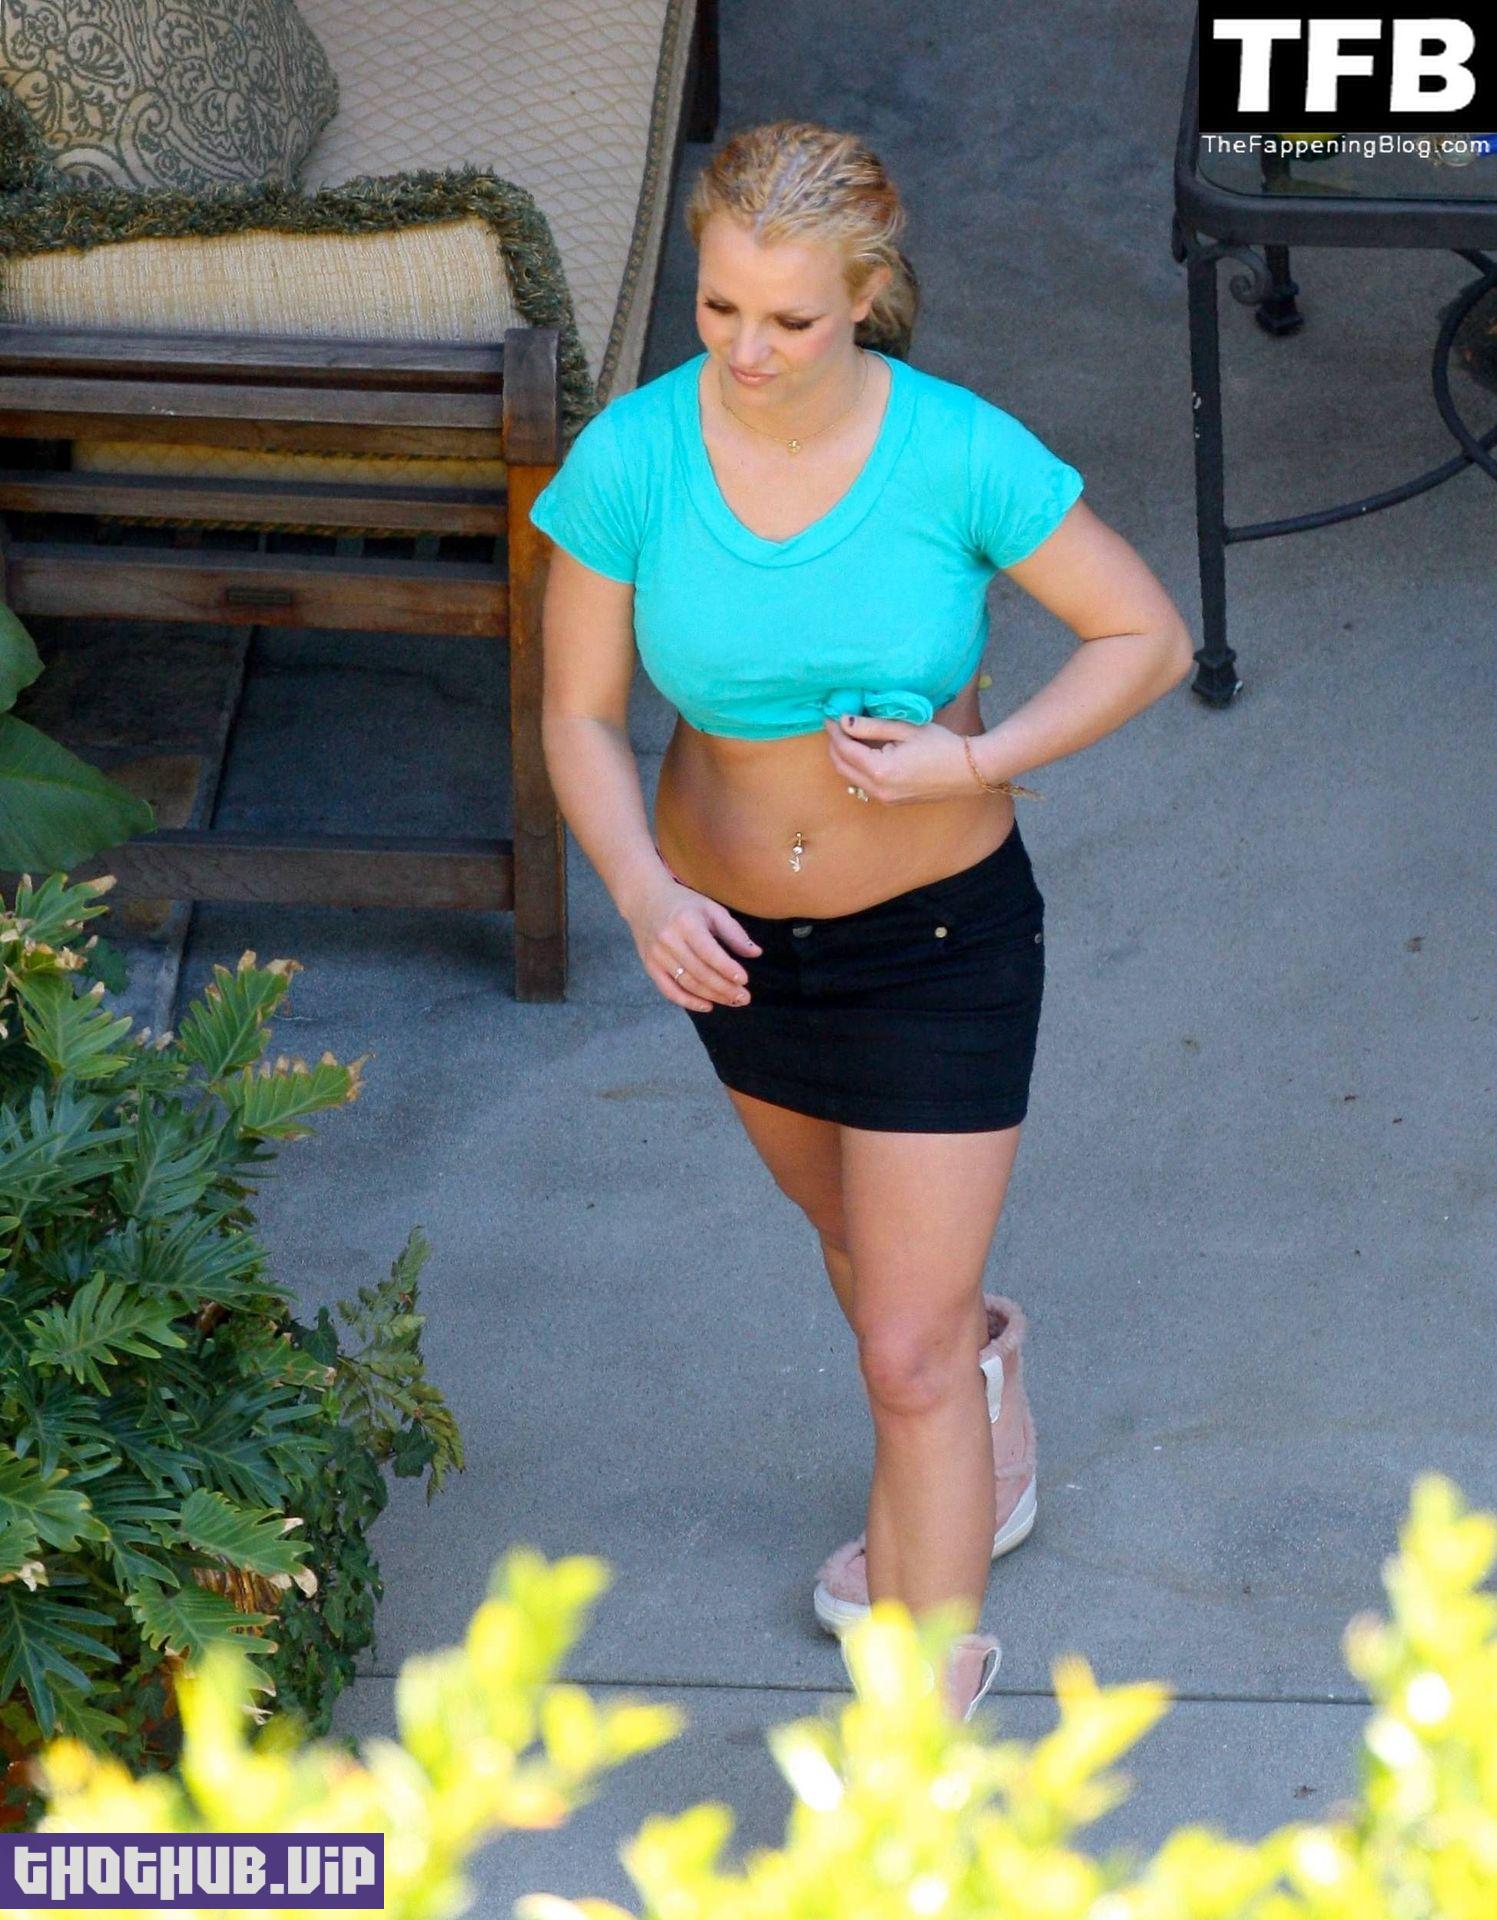 britney spears 30 thefappeningblog.com